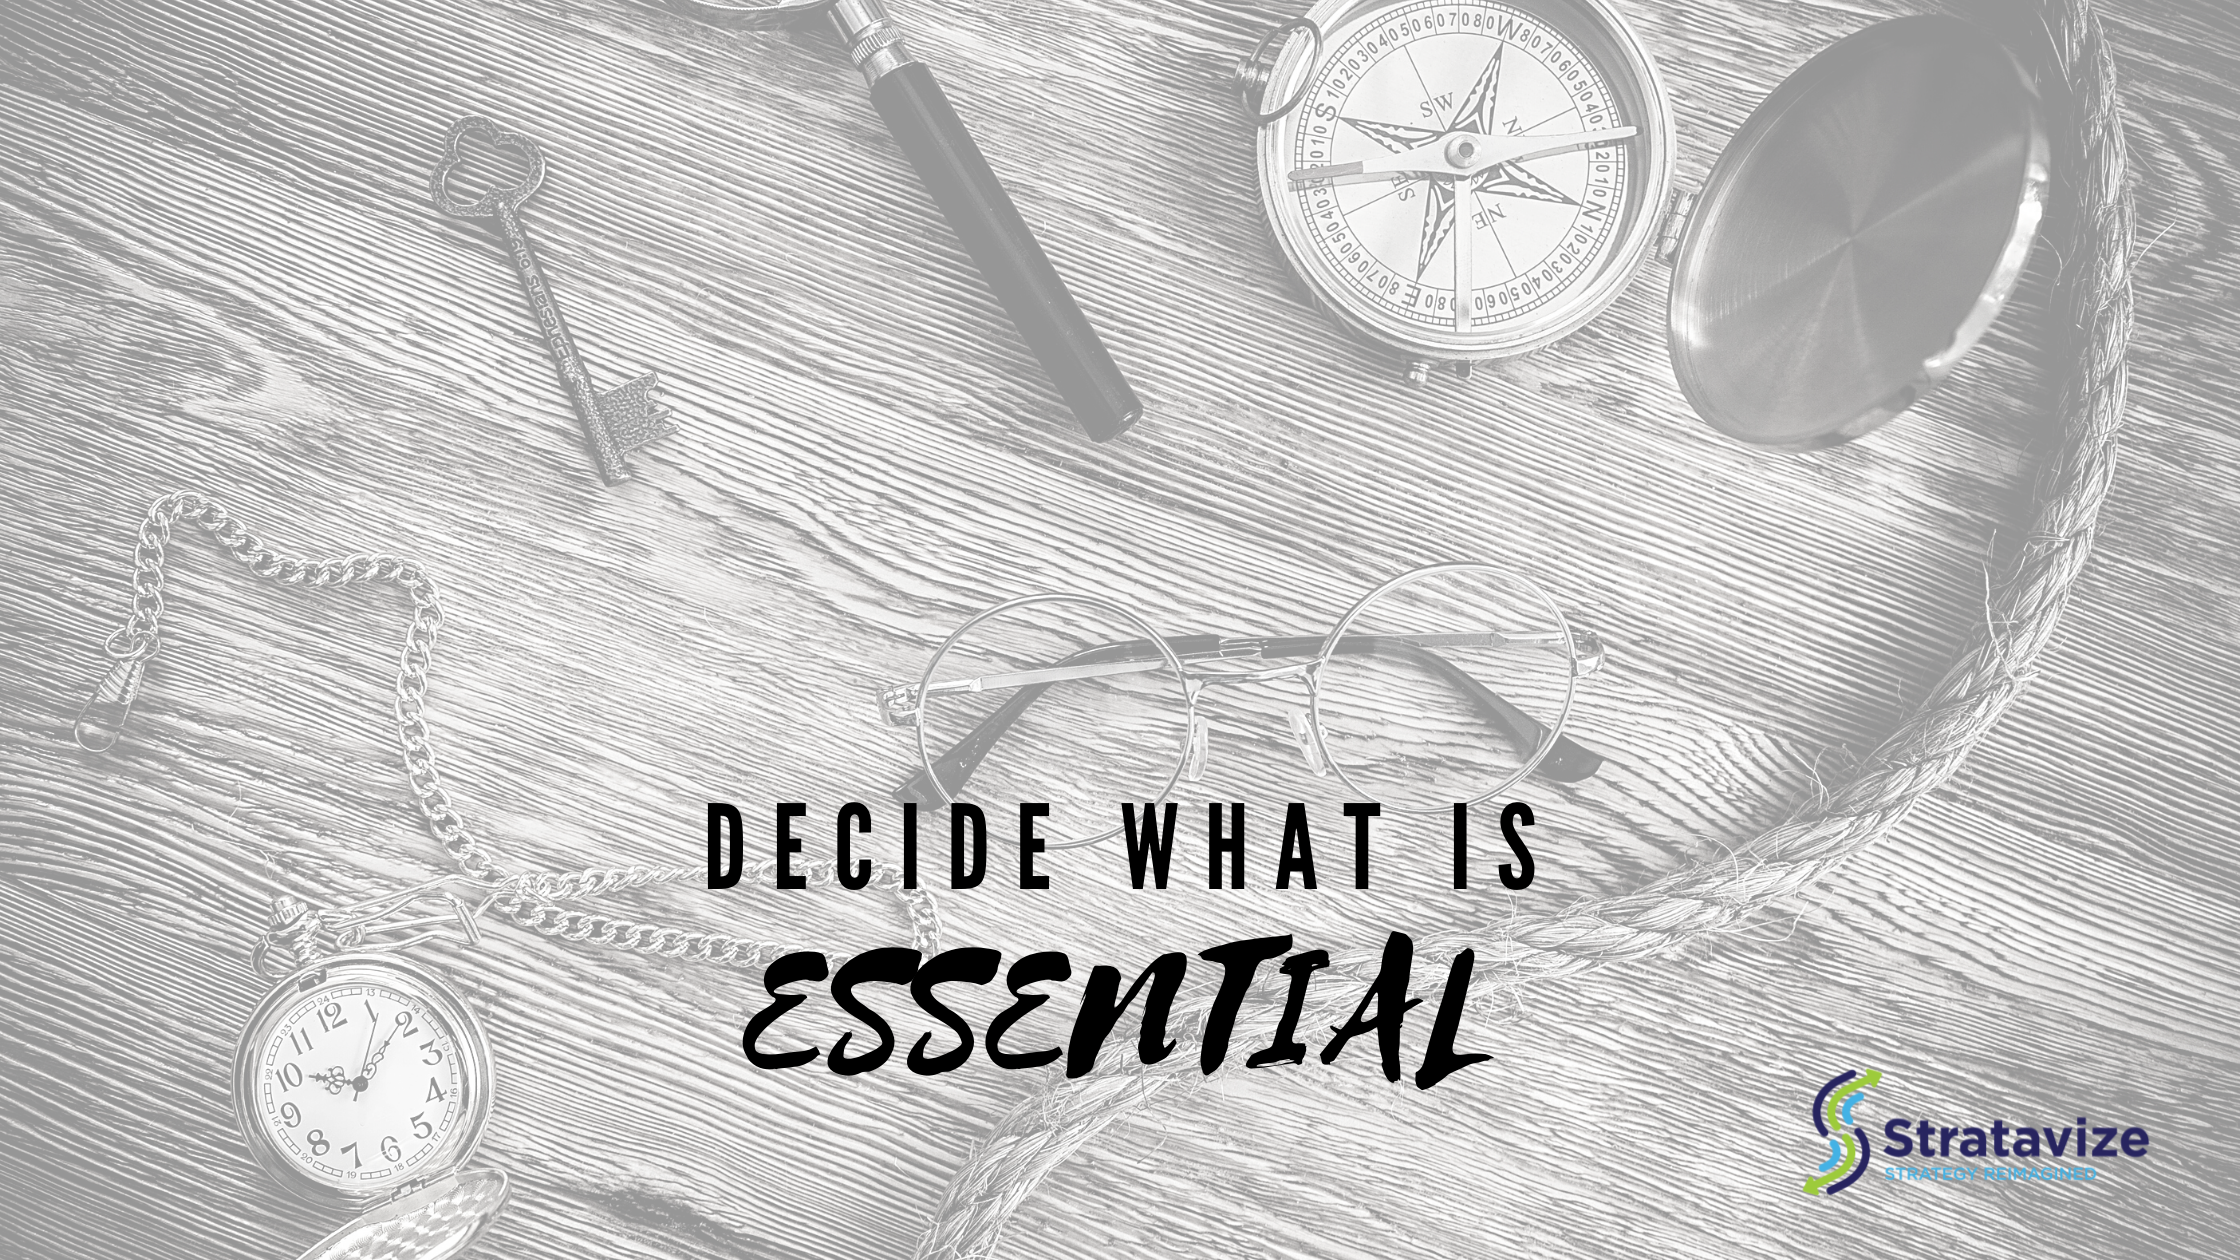 What’s Really Essential In Our Lives?